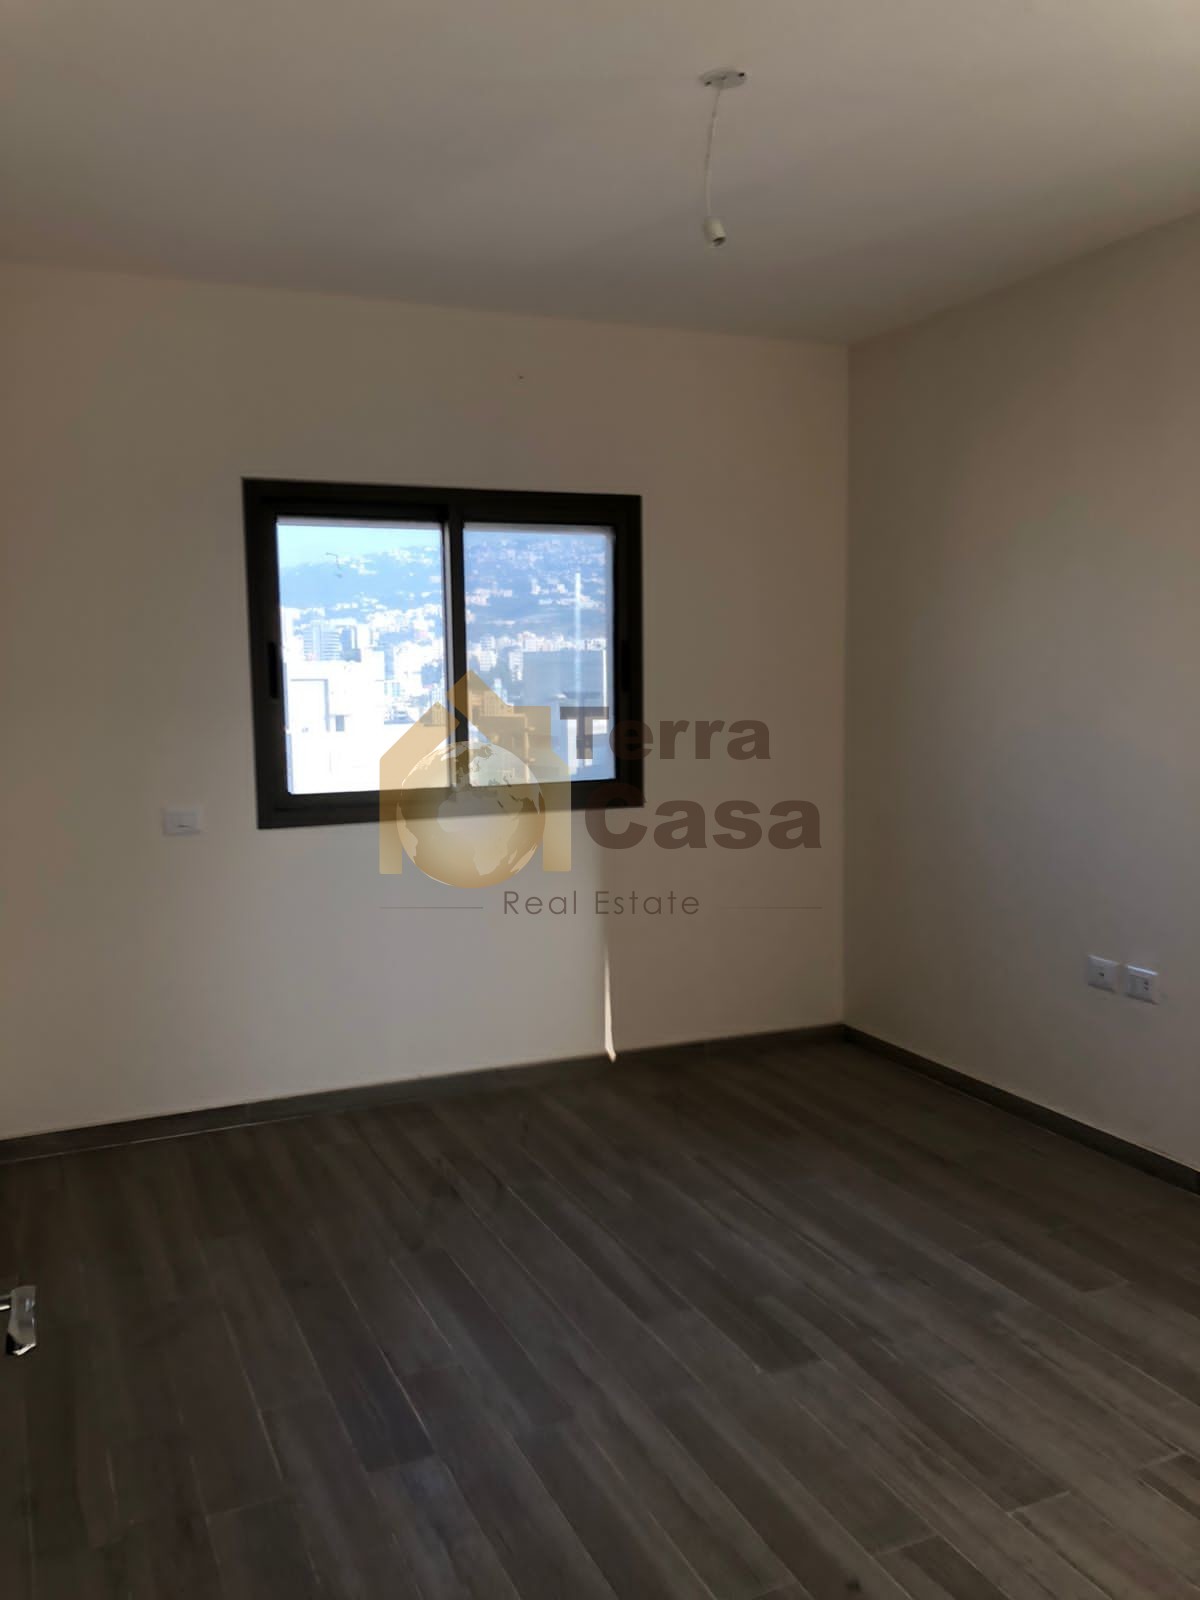 brand new apartment open view .Ref#3430